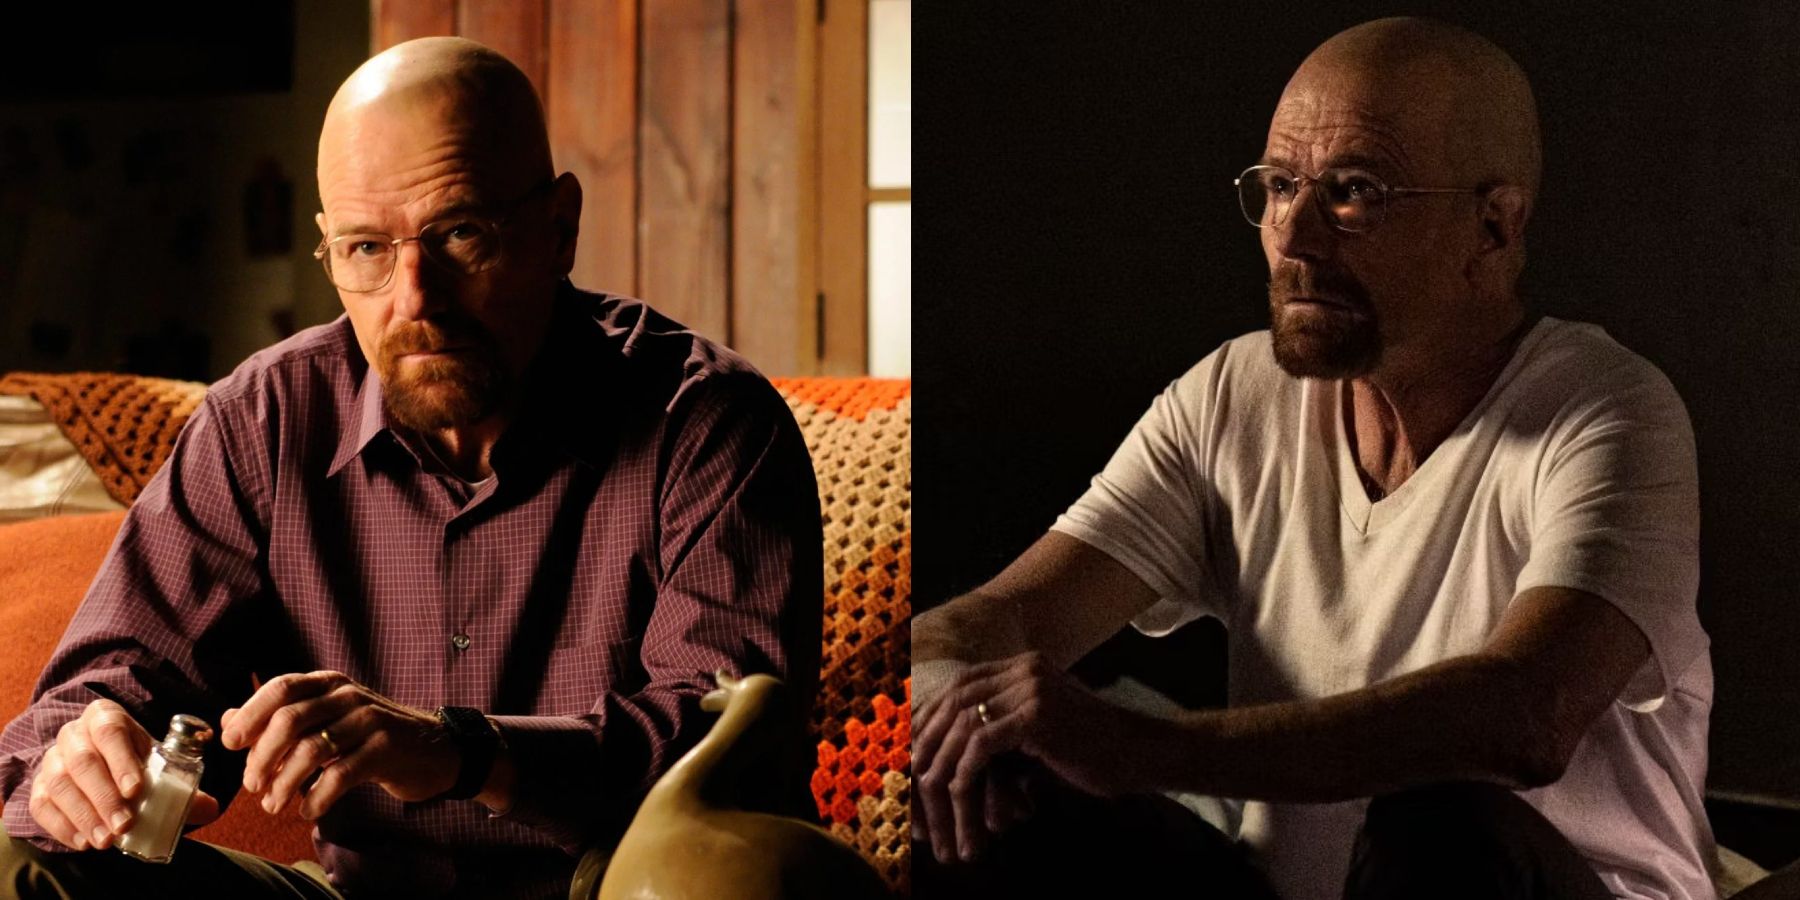 Bryan Cranston as Walter White in Breaking Bad and Better Call Saul